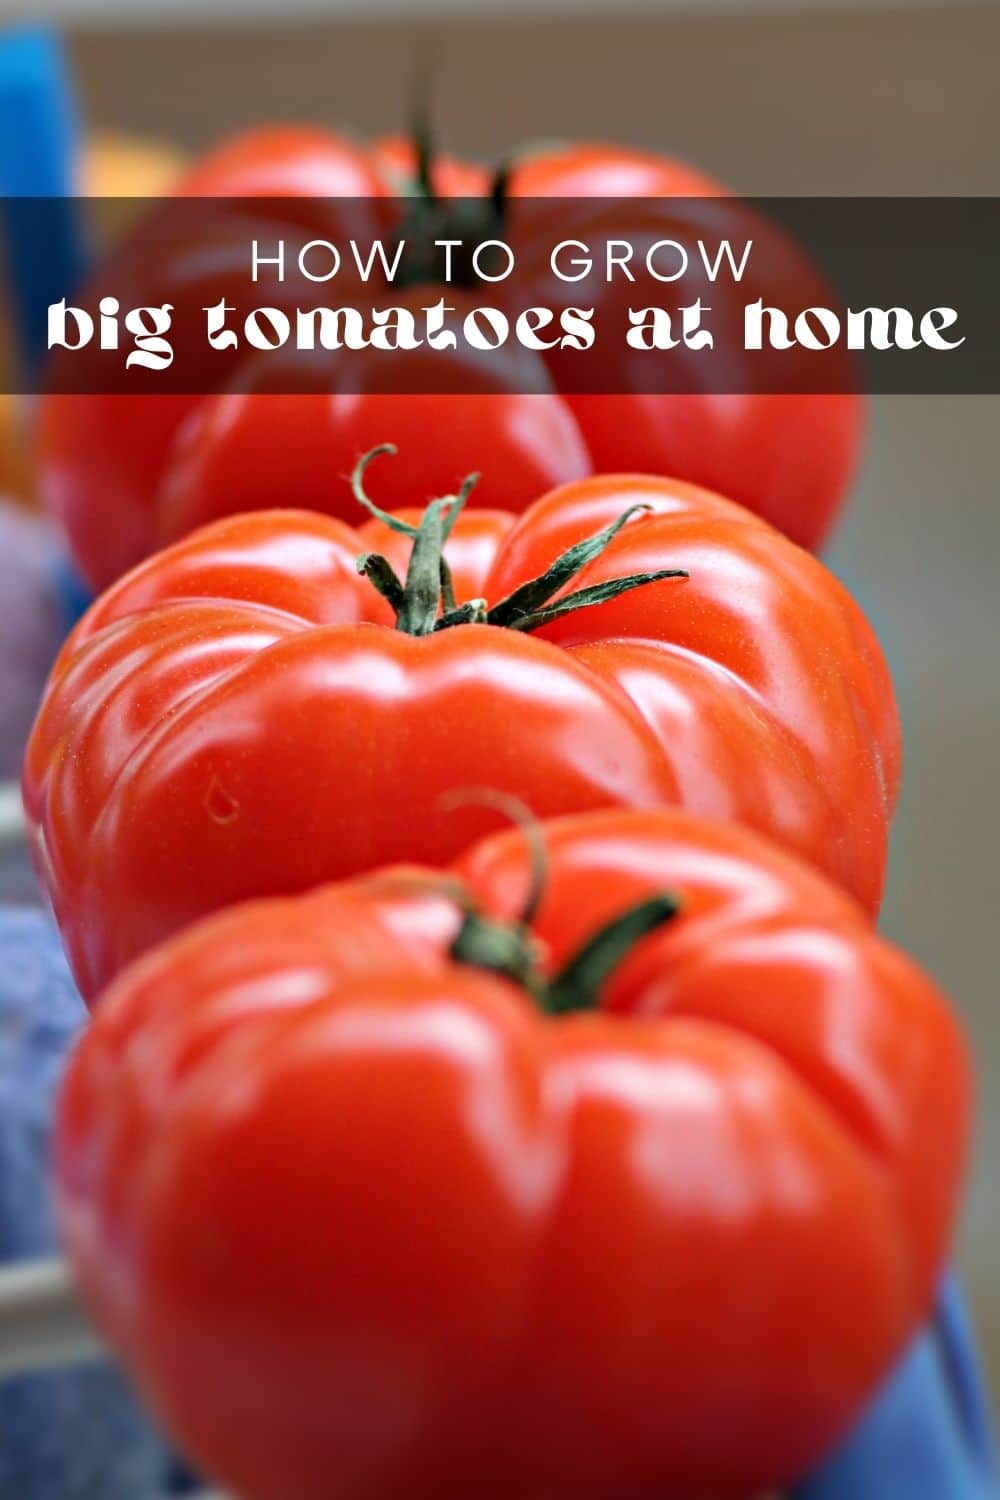 Tomatoes have to be top on the list for anyone starting a vegetable garden. They can be grown almost anywhere and come in various sizes, shapes, and colors. Big tomatoes make the best sandwiches and are perfect for canning! But did you know you can grow big tomatoes in pots? 